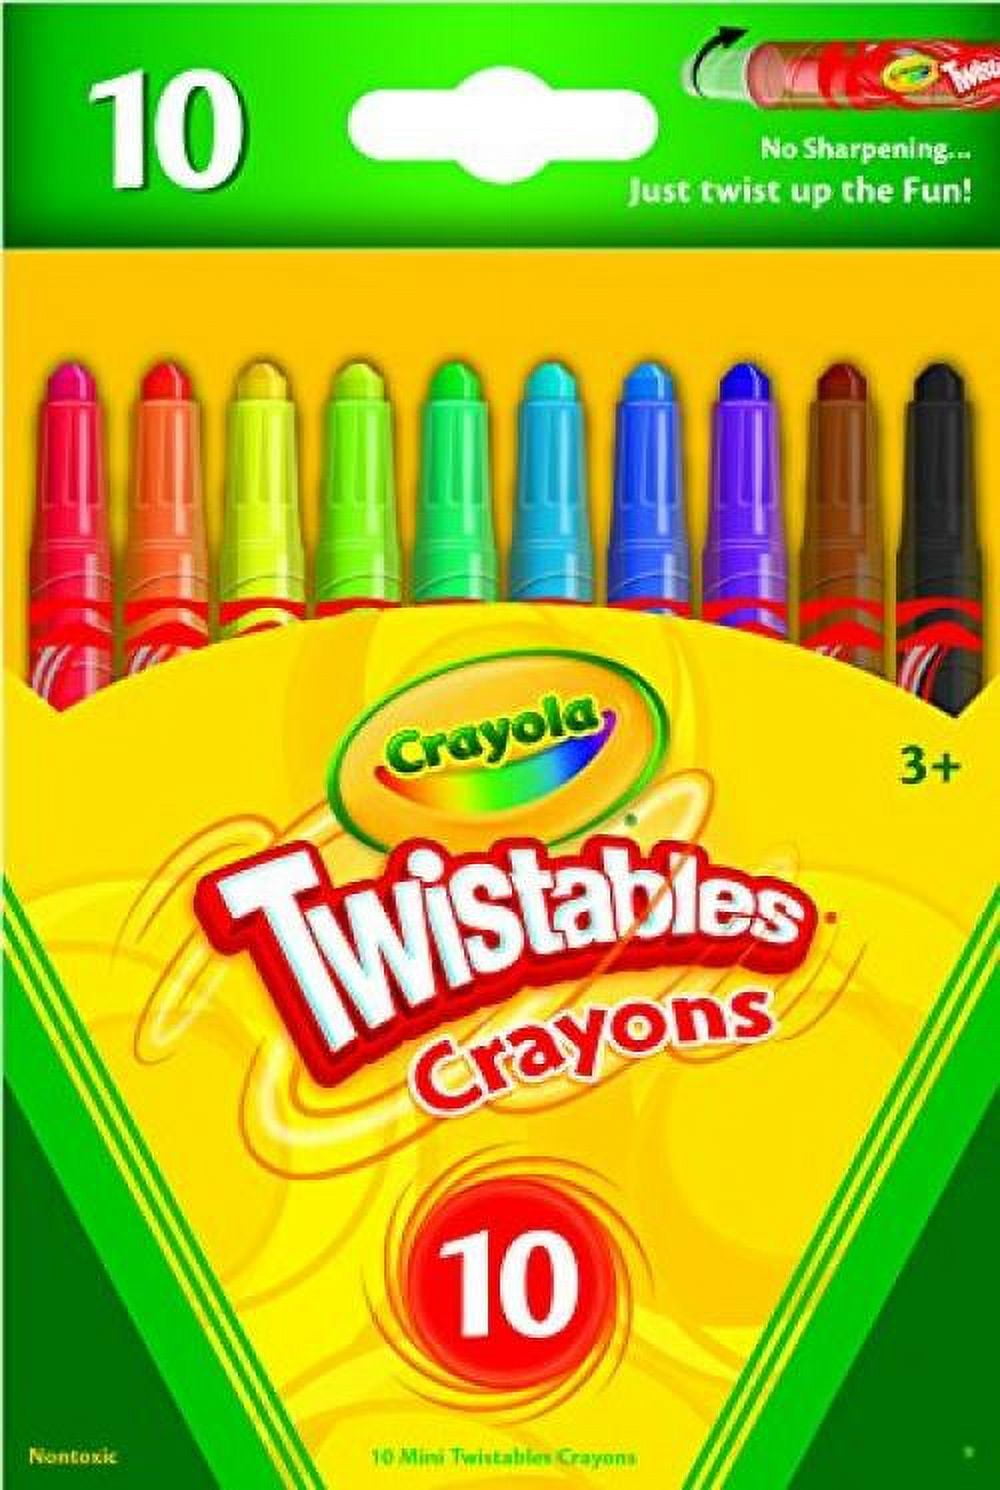 WHOLESALE CRAYOLA 10CT MINI TWISTABLE CRAYONS SOLD BY CASE – Wholesale  California